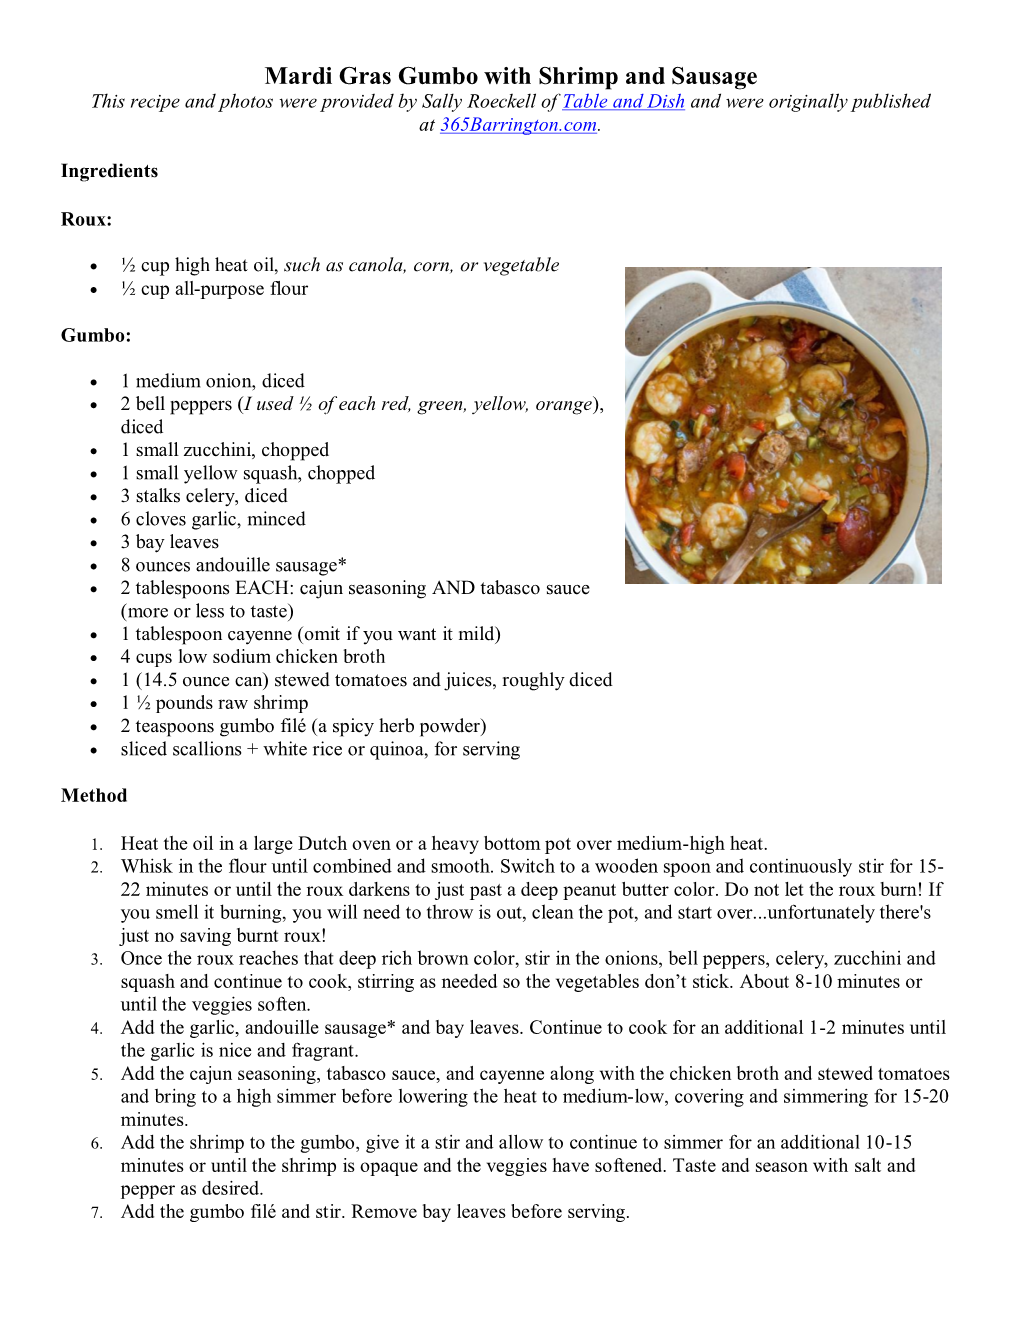 Mardi Gras Gumbo with Shrimp and Sausage This Recipe and Photos Were Provided by Sally Roeckell of Table and Dish and Were Originally Published at 365Barrington.Com